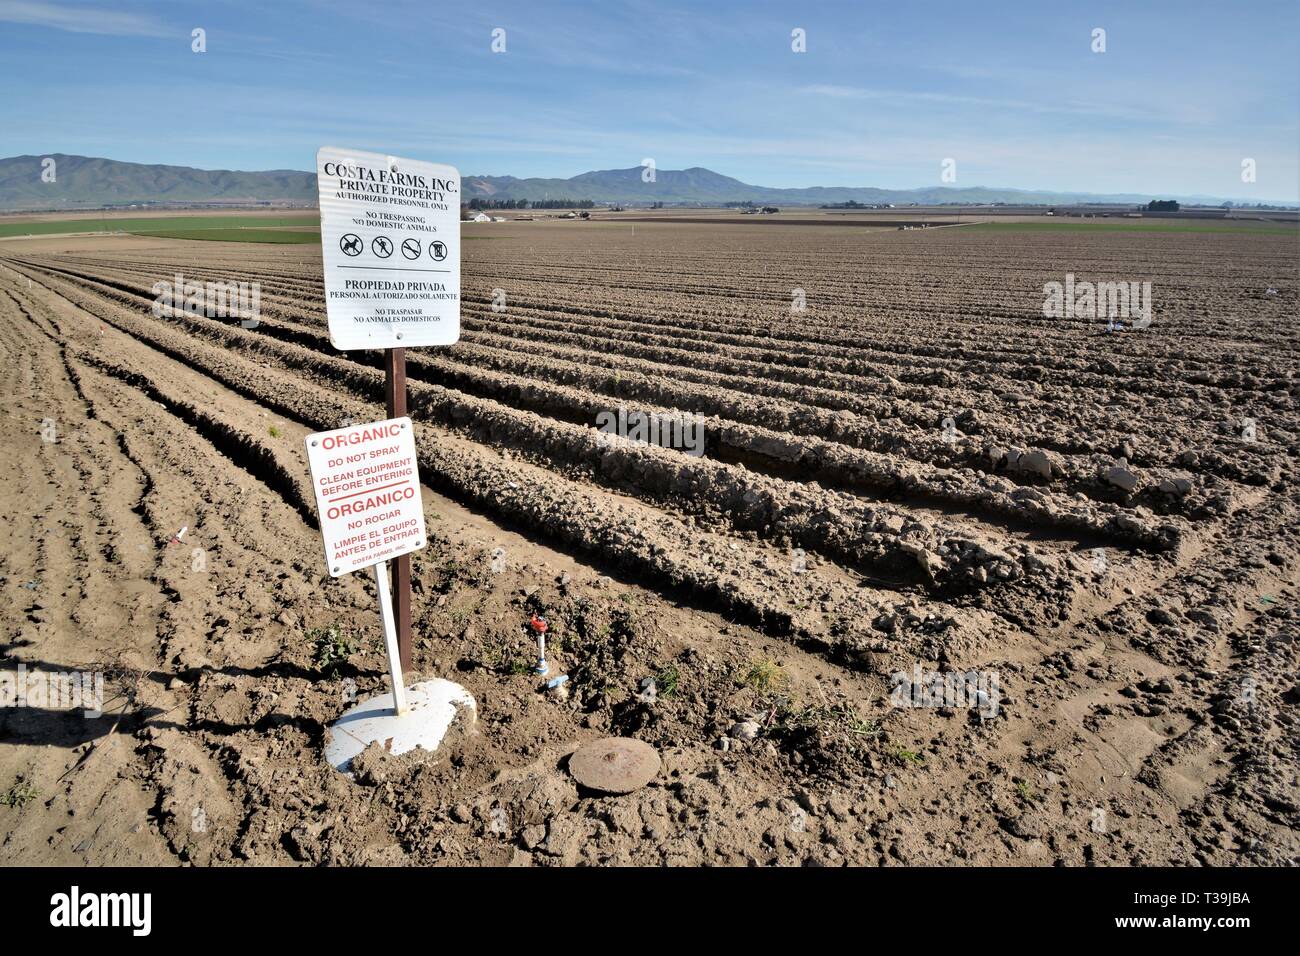 Food growing field with organic sign for no pesticides or chemicals in Salinas Valley of California Stock Photo